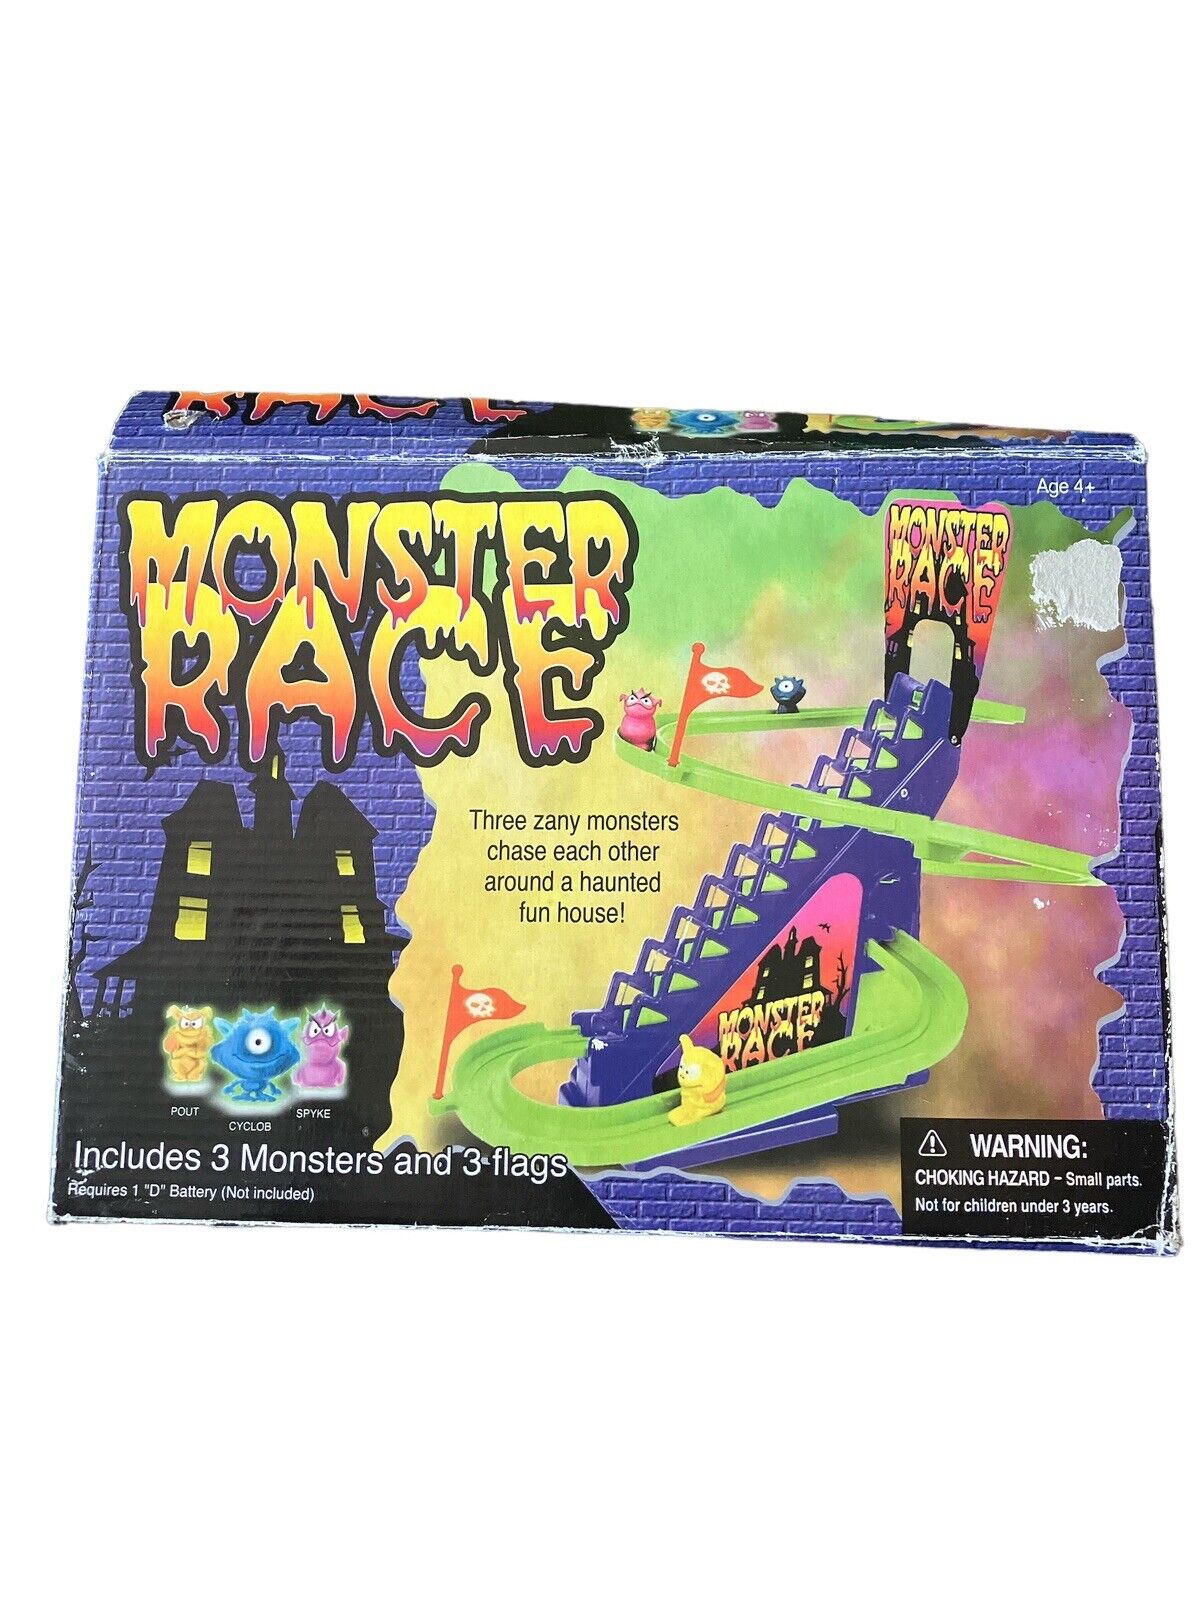 Monster Race 2001 Gemmy Industries Cyclob Spyke Haunted Fun House Toy Complete